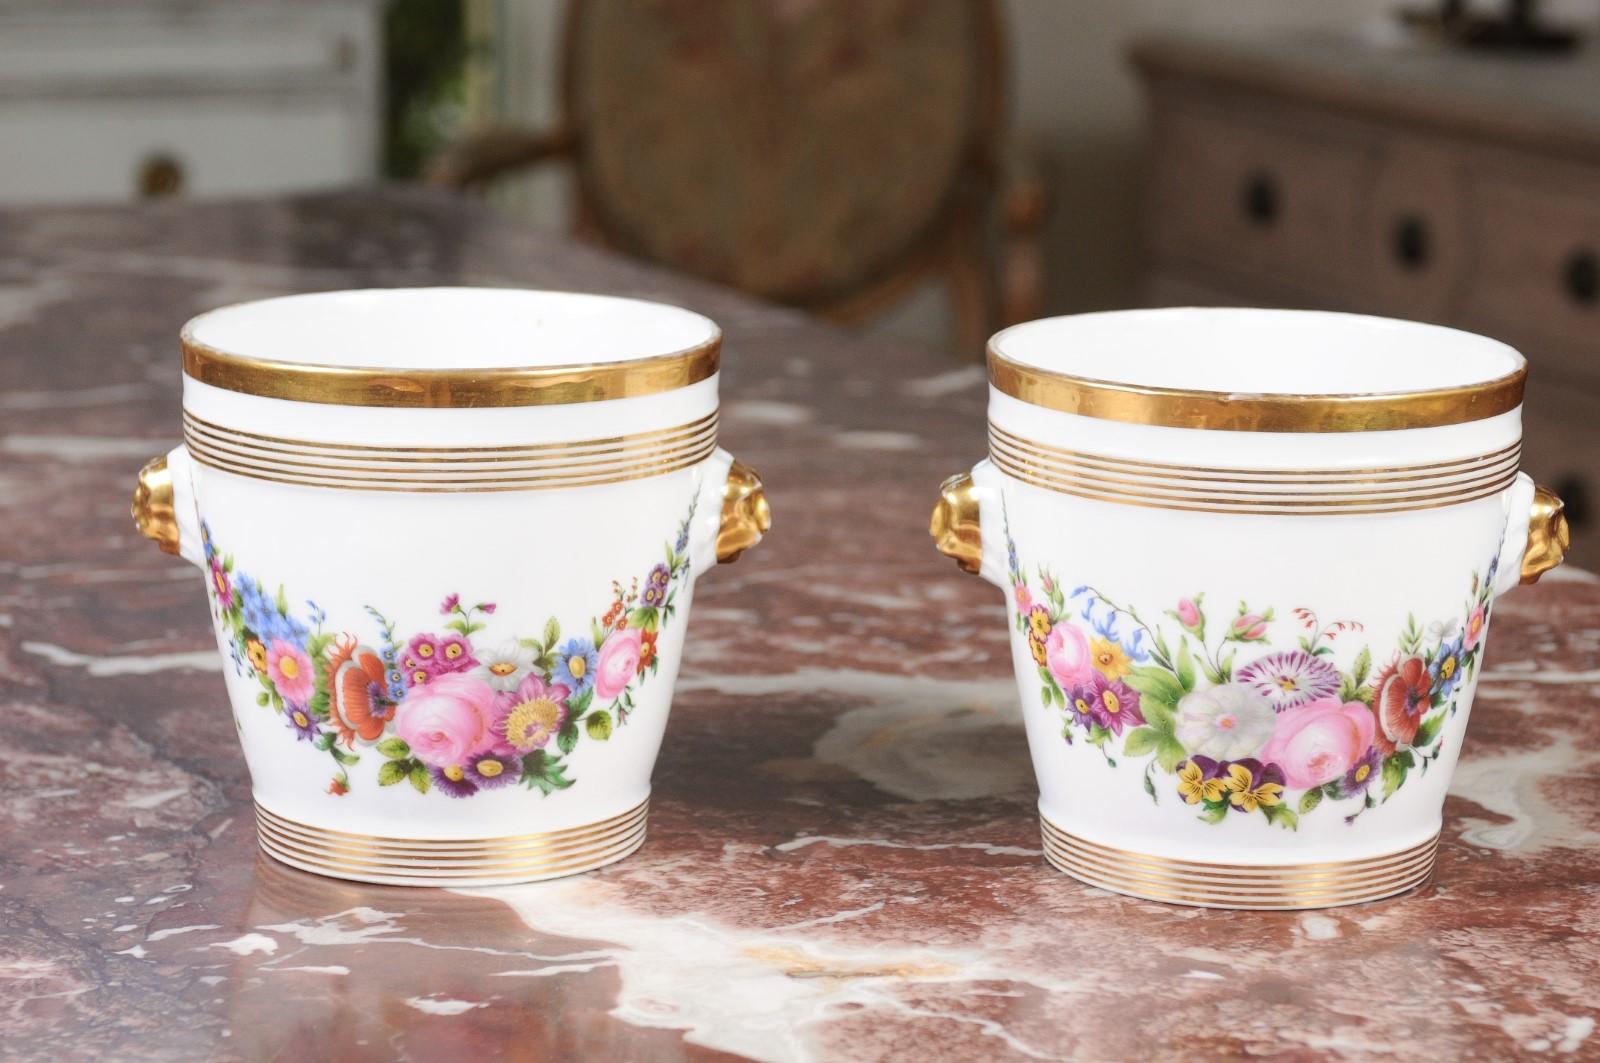 A pair of French Louis-Philippe period Paris porcelain cachepots from the mid-19th century, with hand-painted floral décor and gilt accents. Born in France at the end of the reign of King Louis-Philippe, each of this pair of cachepots features a